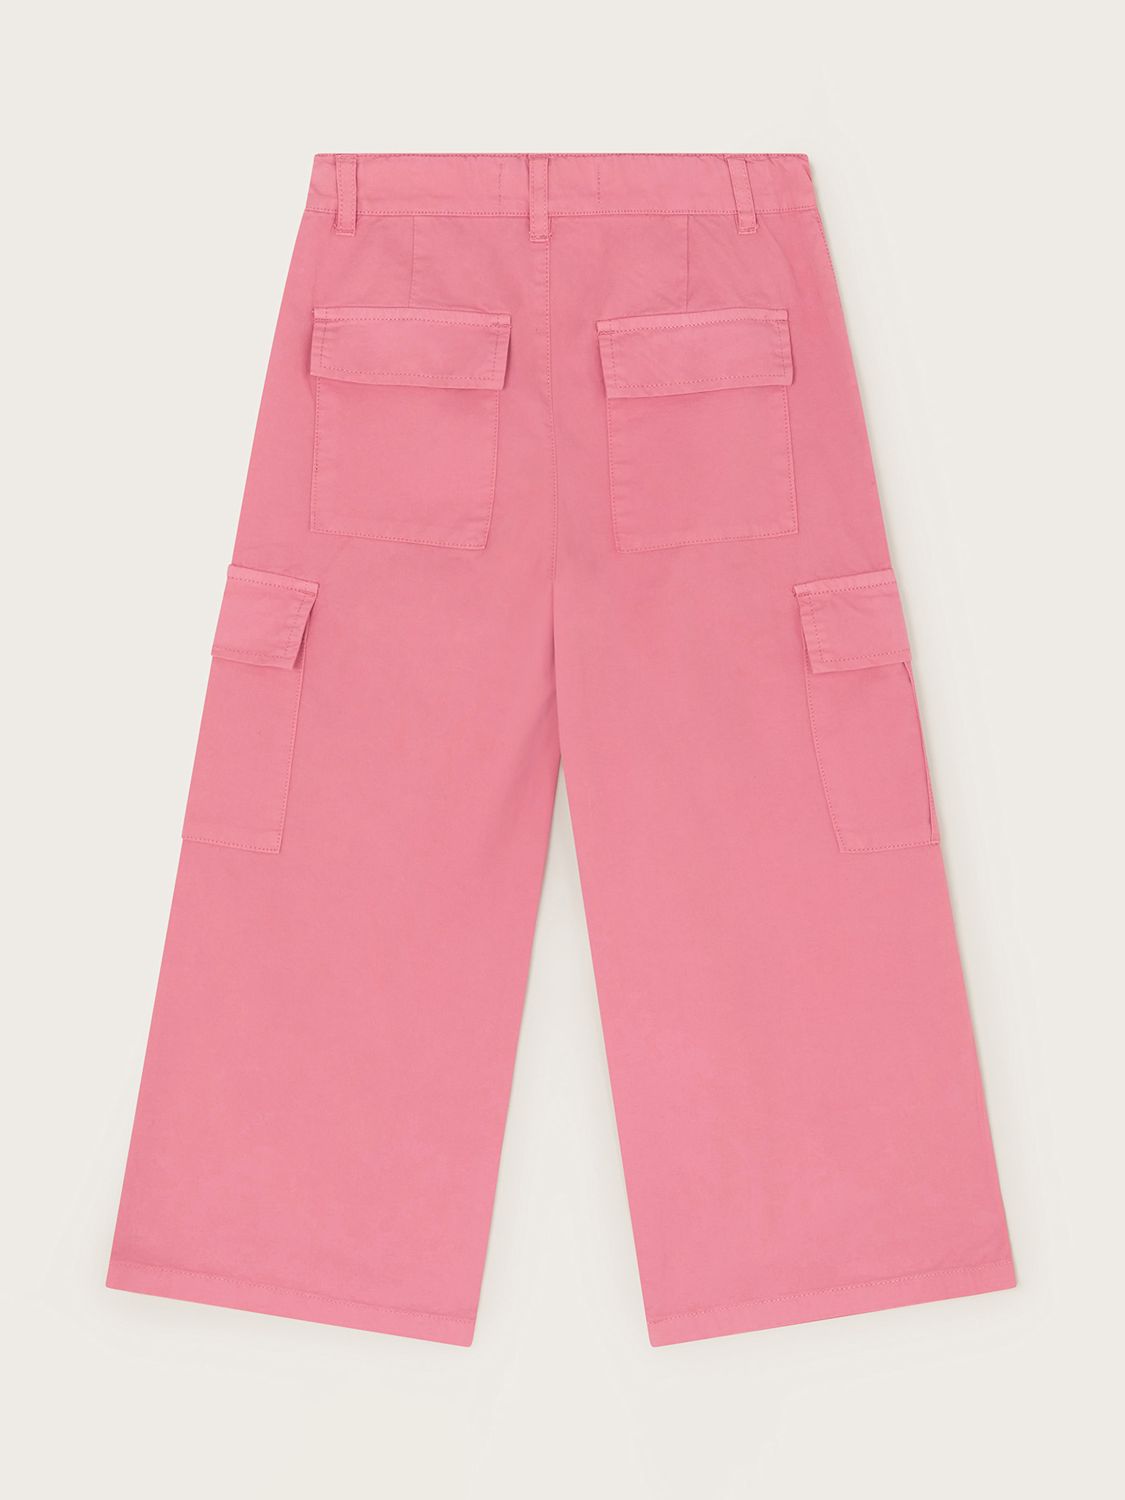 Buy Monsoon Kids' Utility Trousers, Pink Online at johnlewis.com